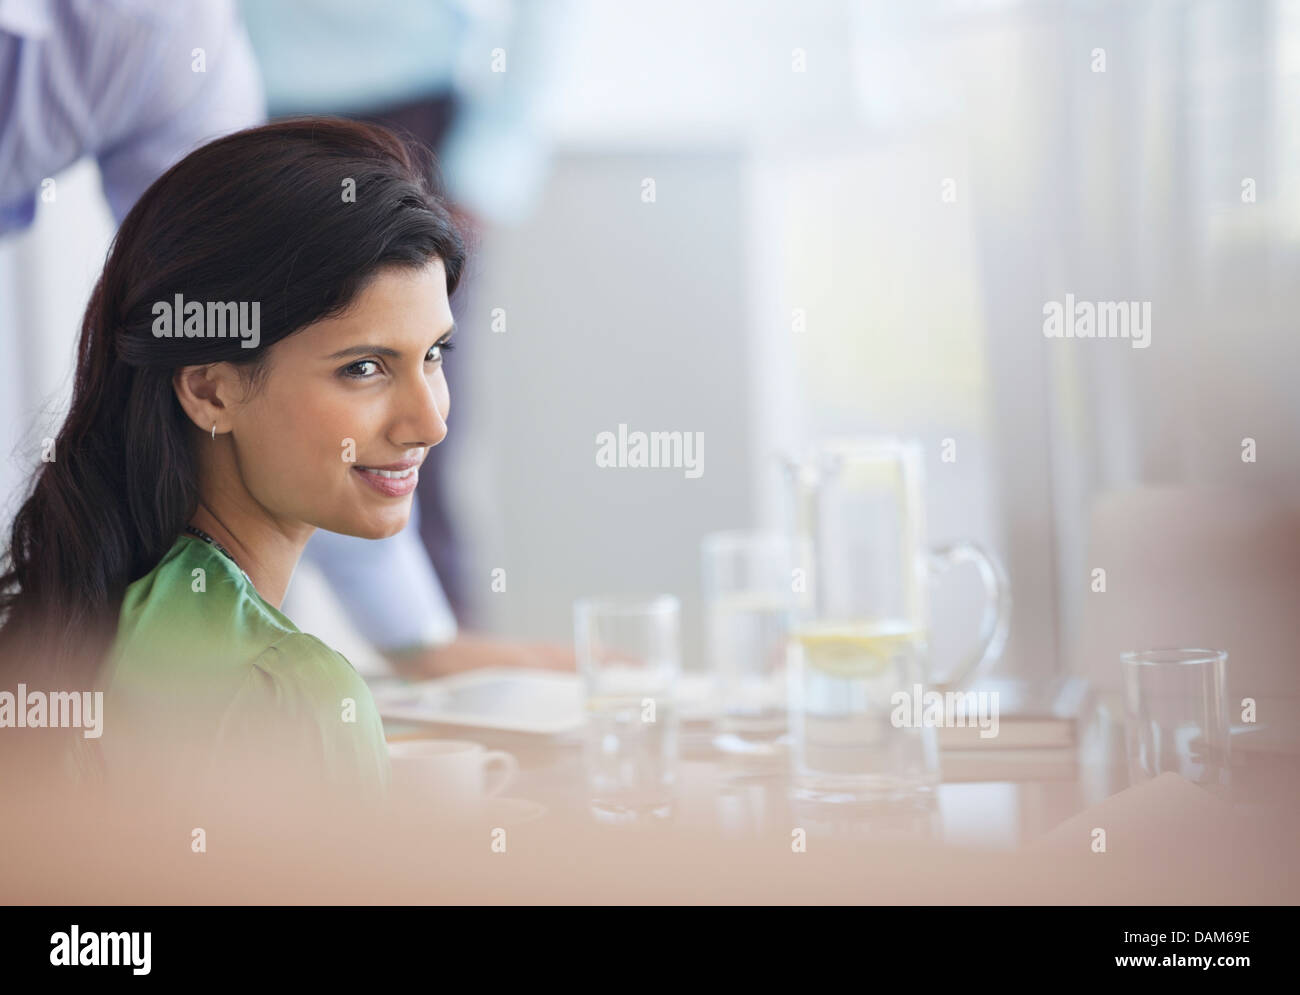 Businesswoman smiling at meeting table Stock Photo